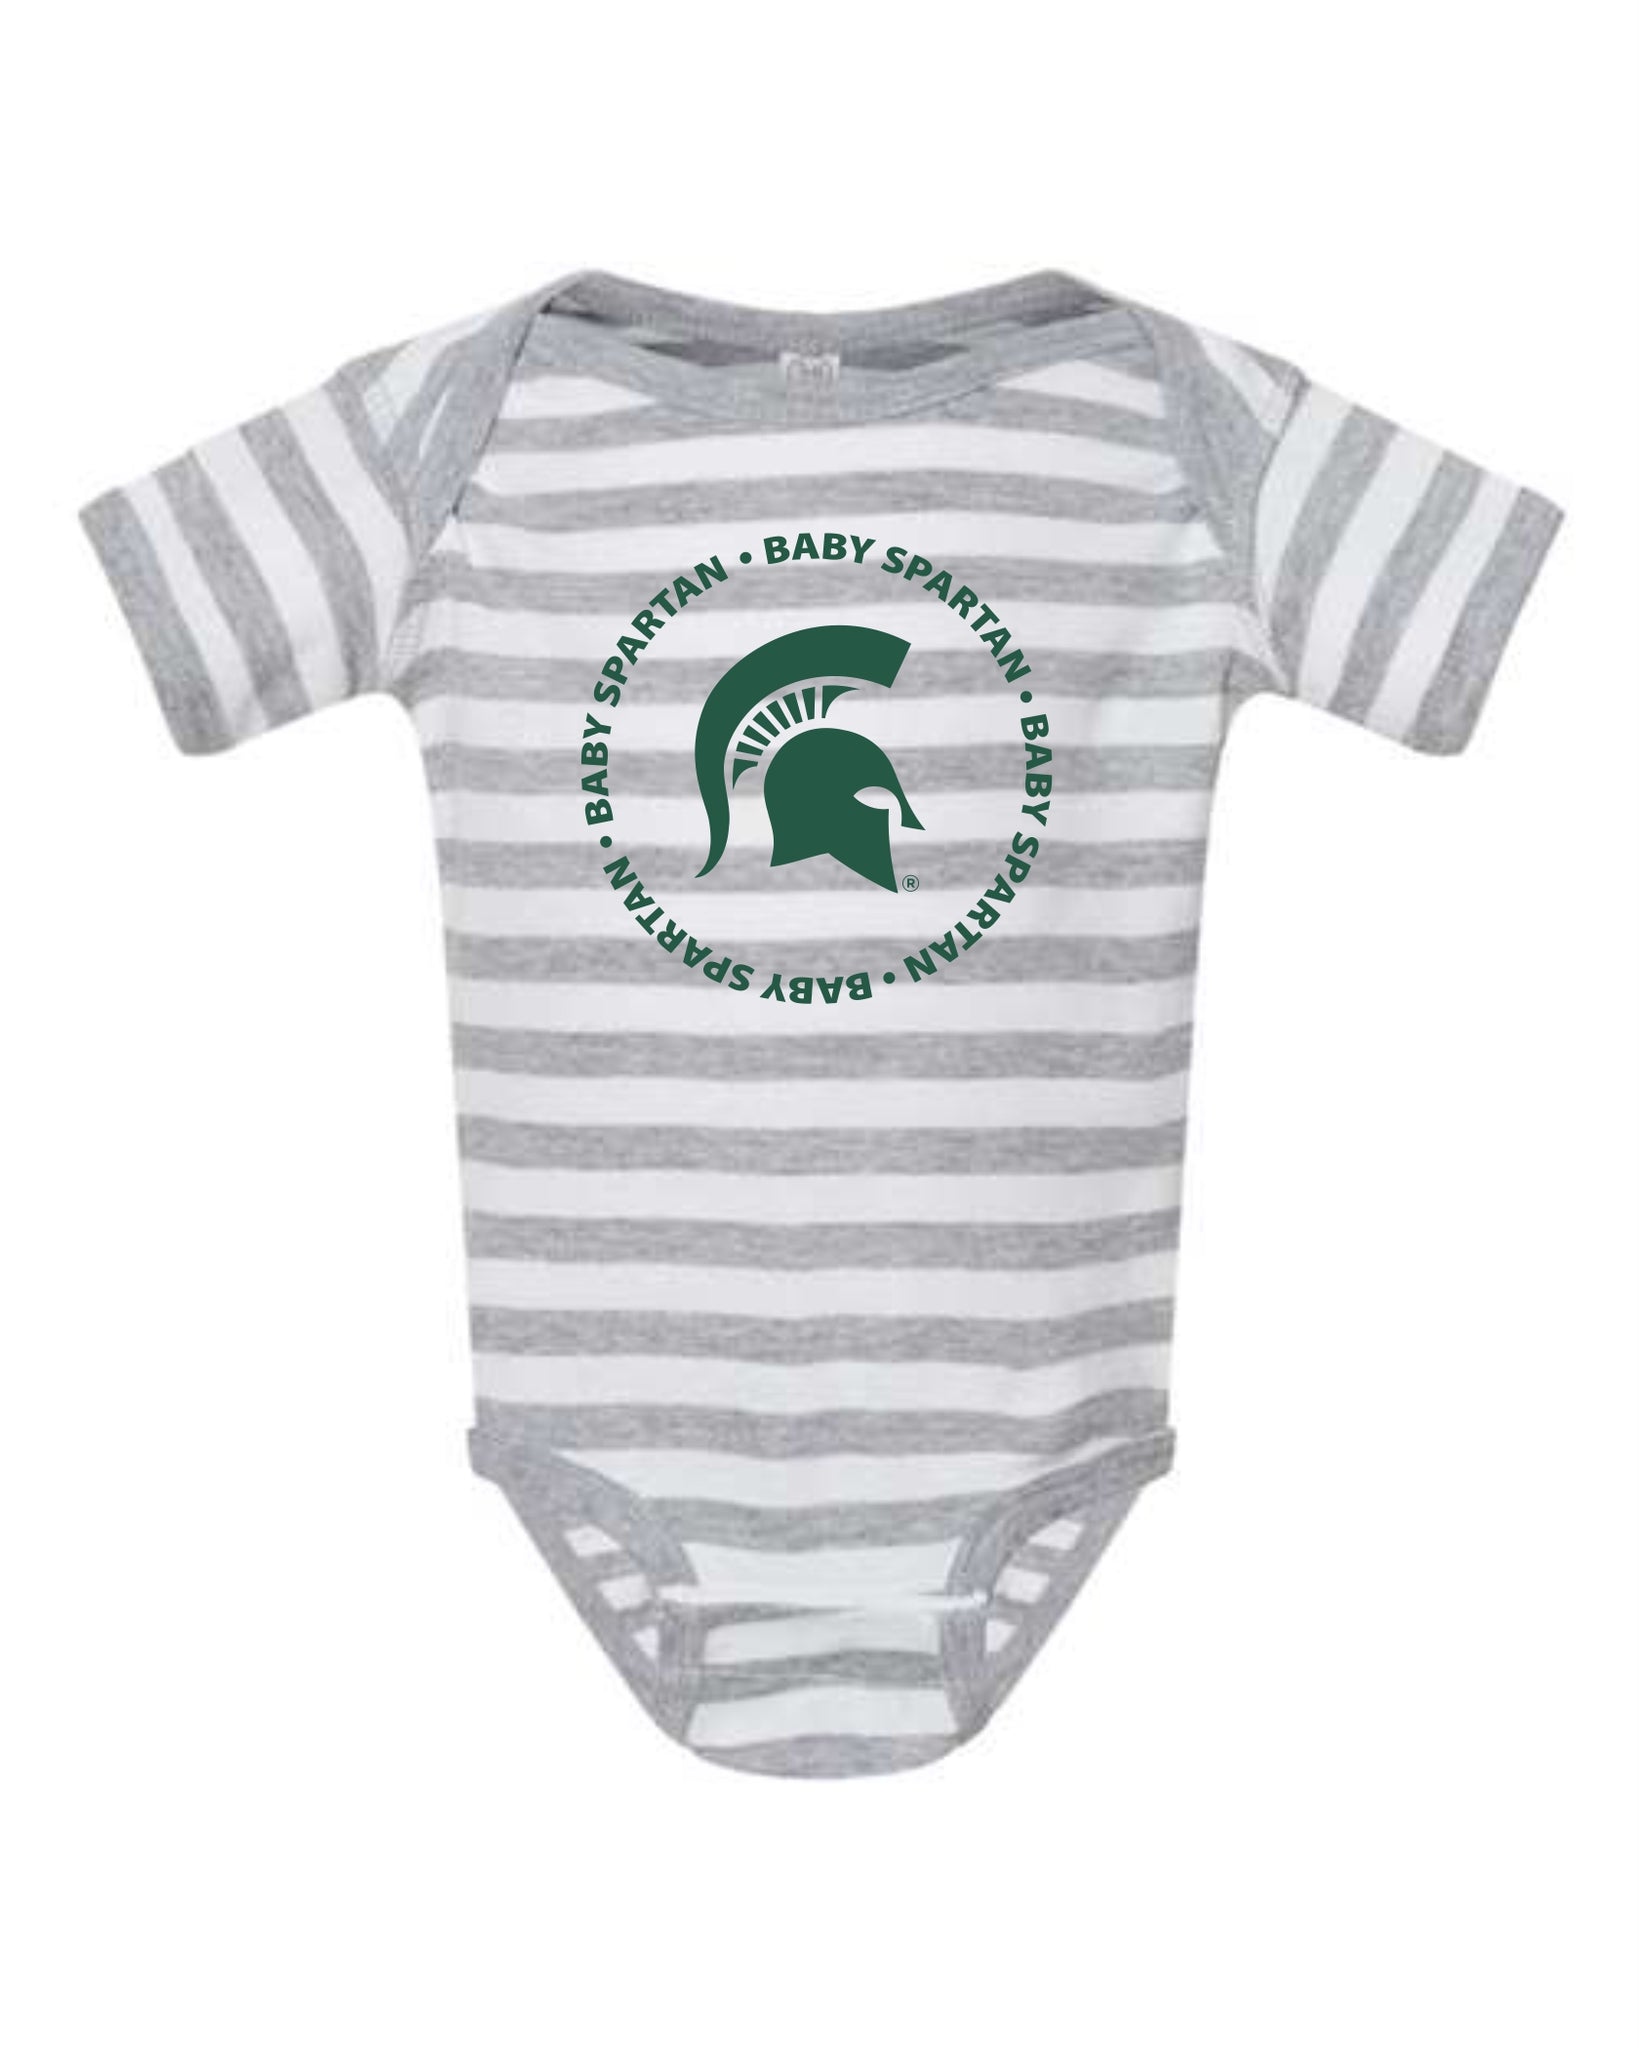 Spartans Caution this is spartan' Baby Organic T-Shirt